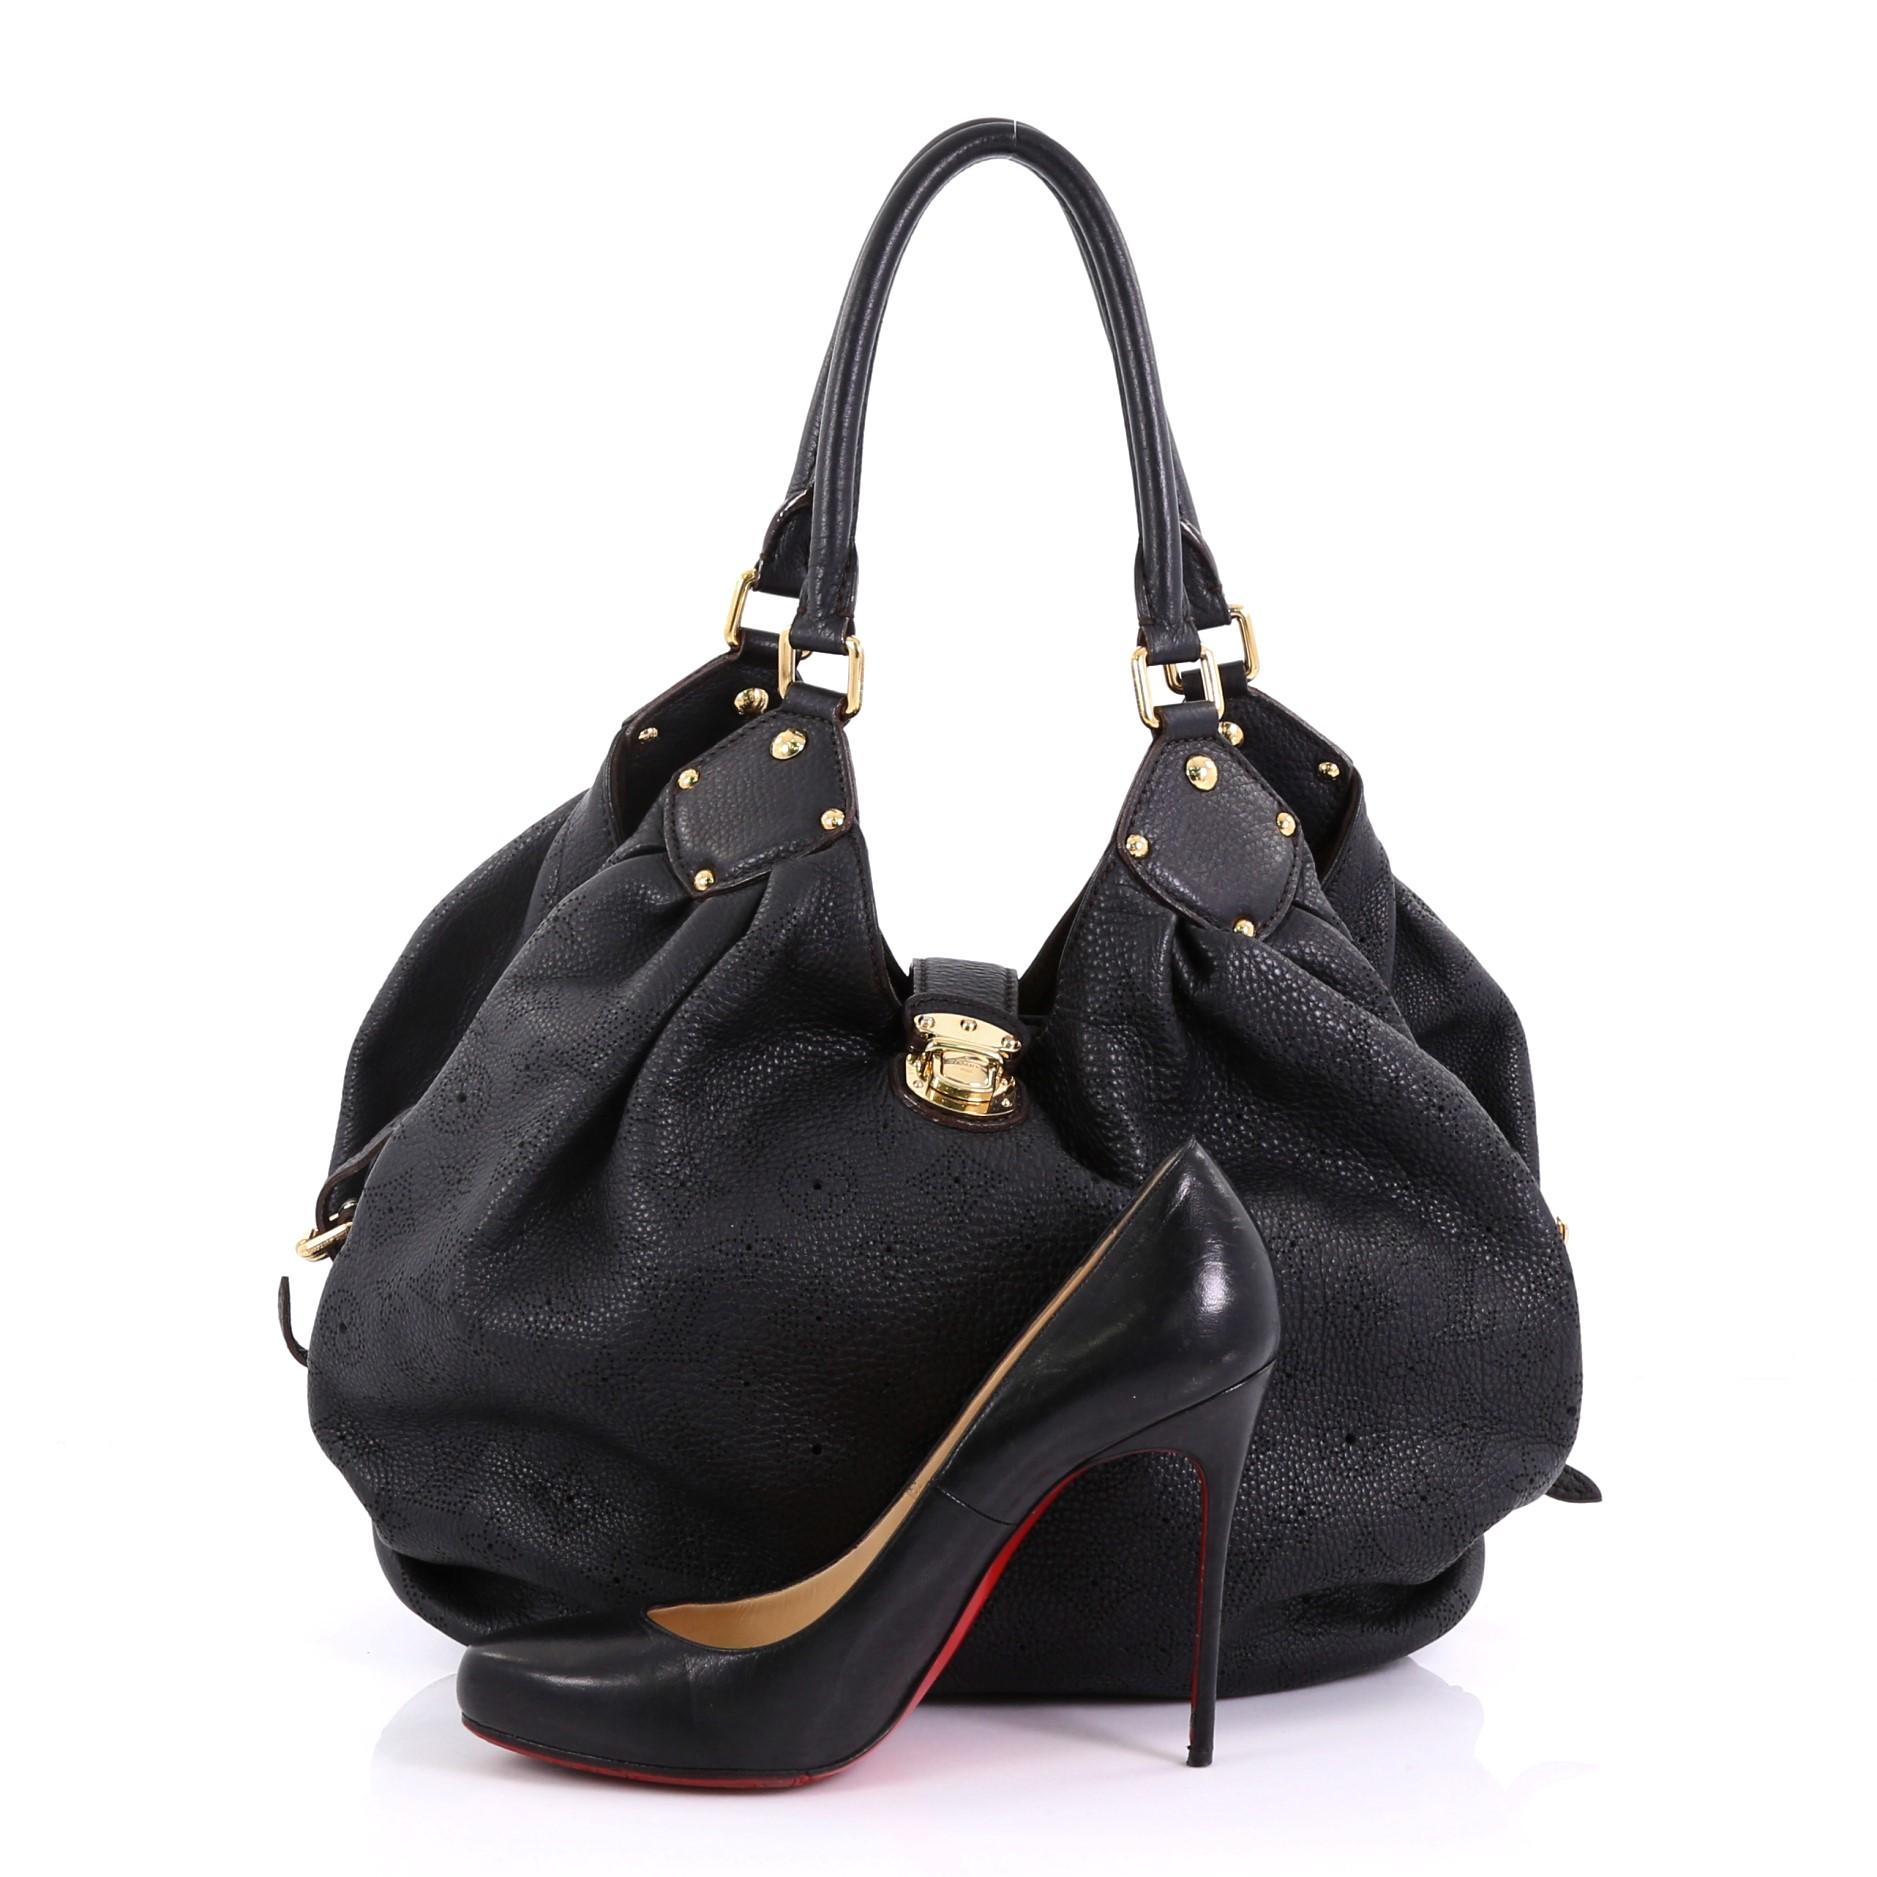 This Louis Vuitton XL Hobo Mahina Leather, crafted from black monogram mahina leather, features dual rolled handles, buckle and stud details, and gold-tone hardware. Its engraved top flap push-lock closure opens to a brown microfiber interior with